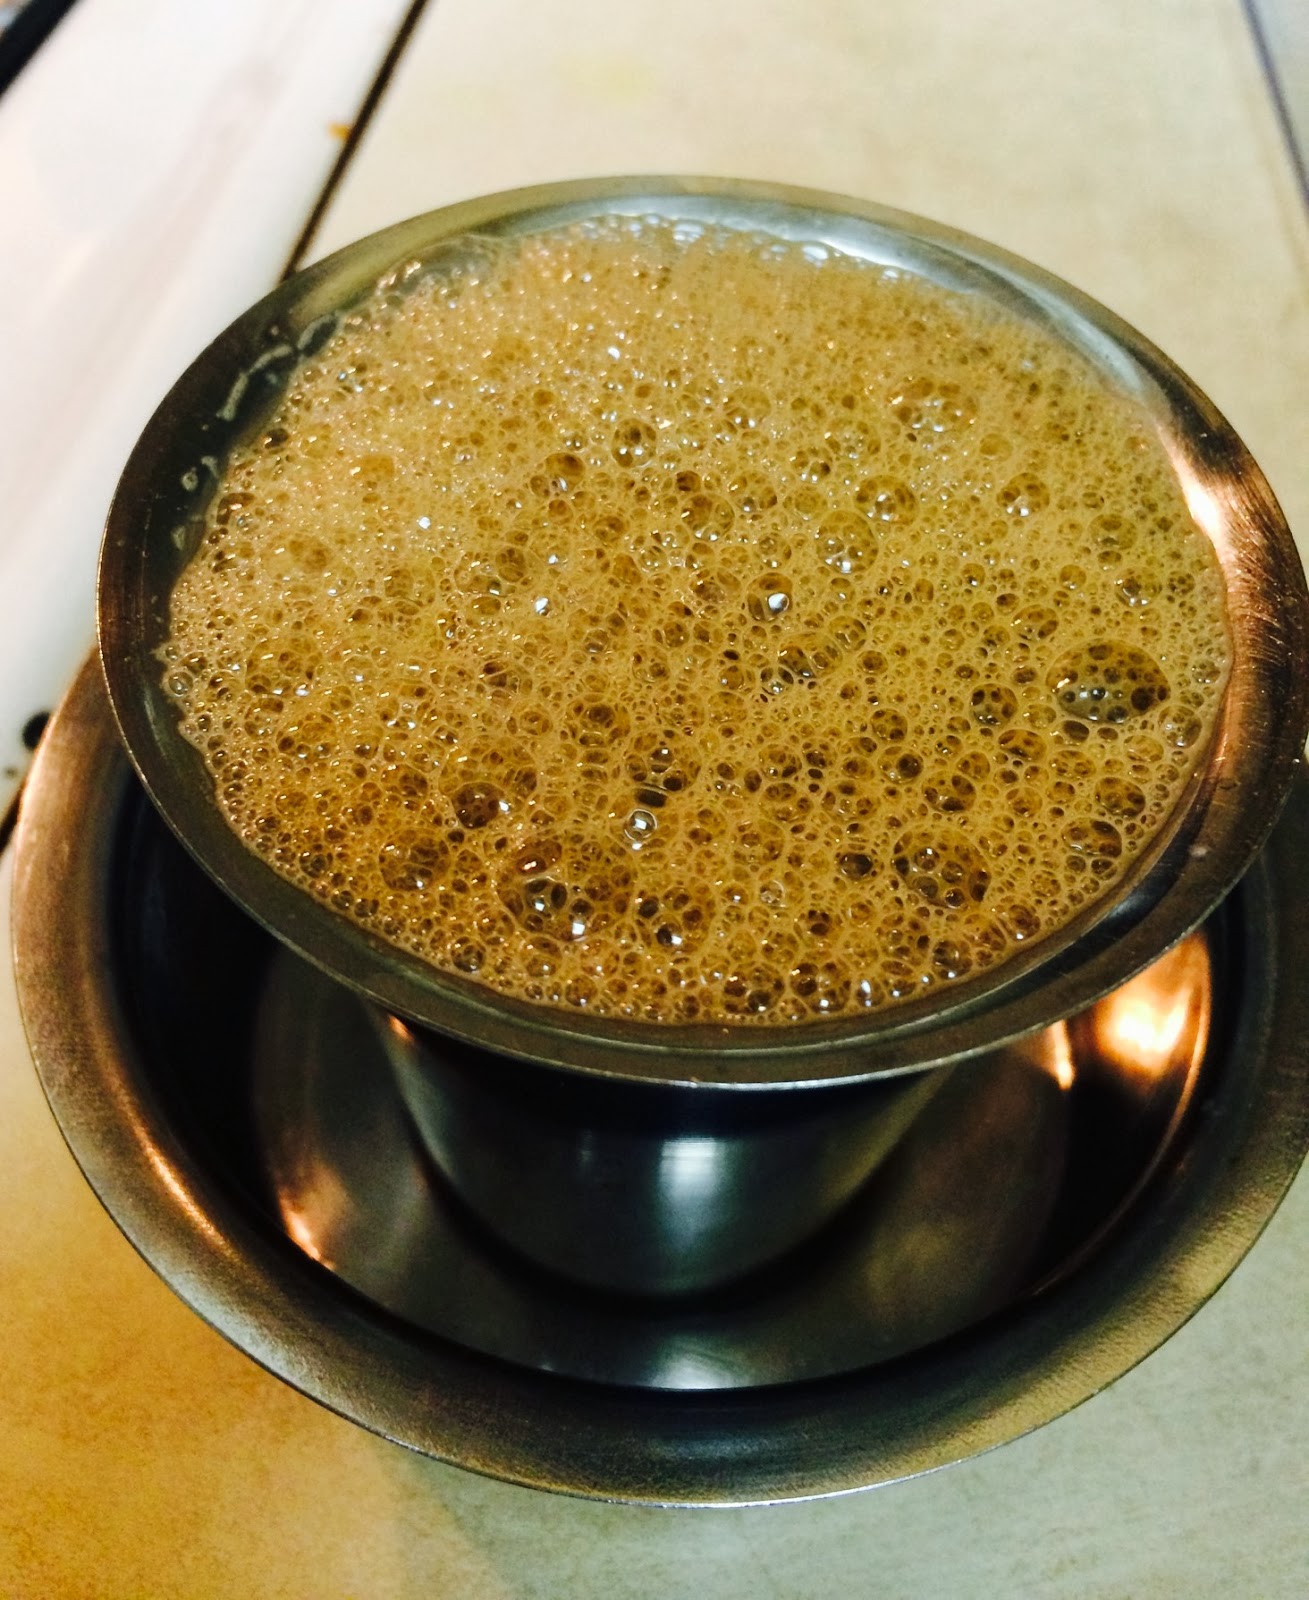 How To Make South Indian Filter Coffee?